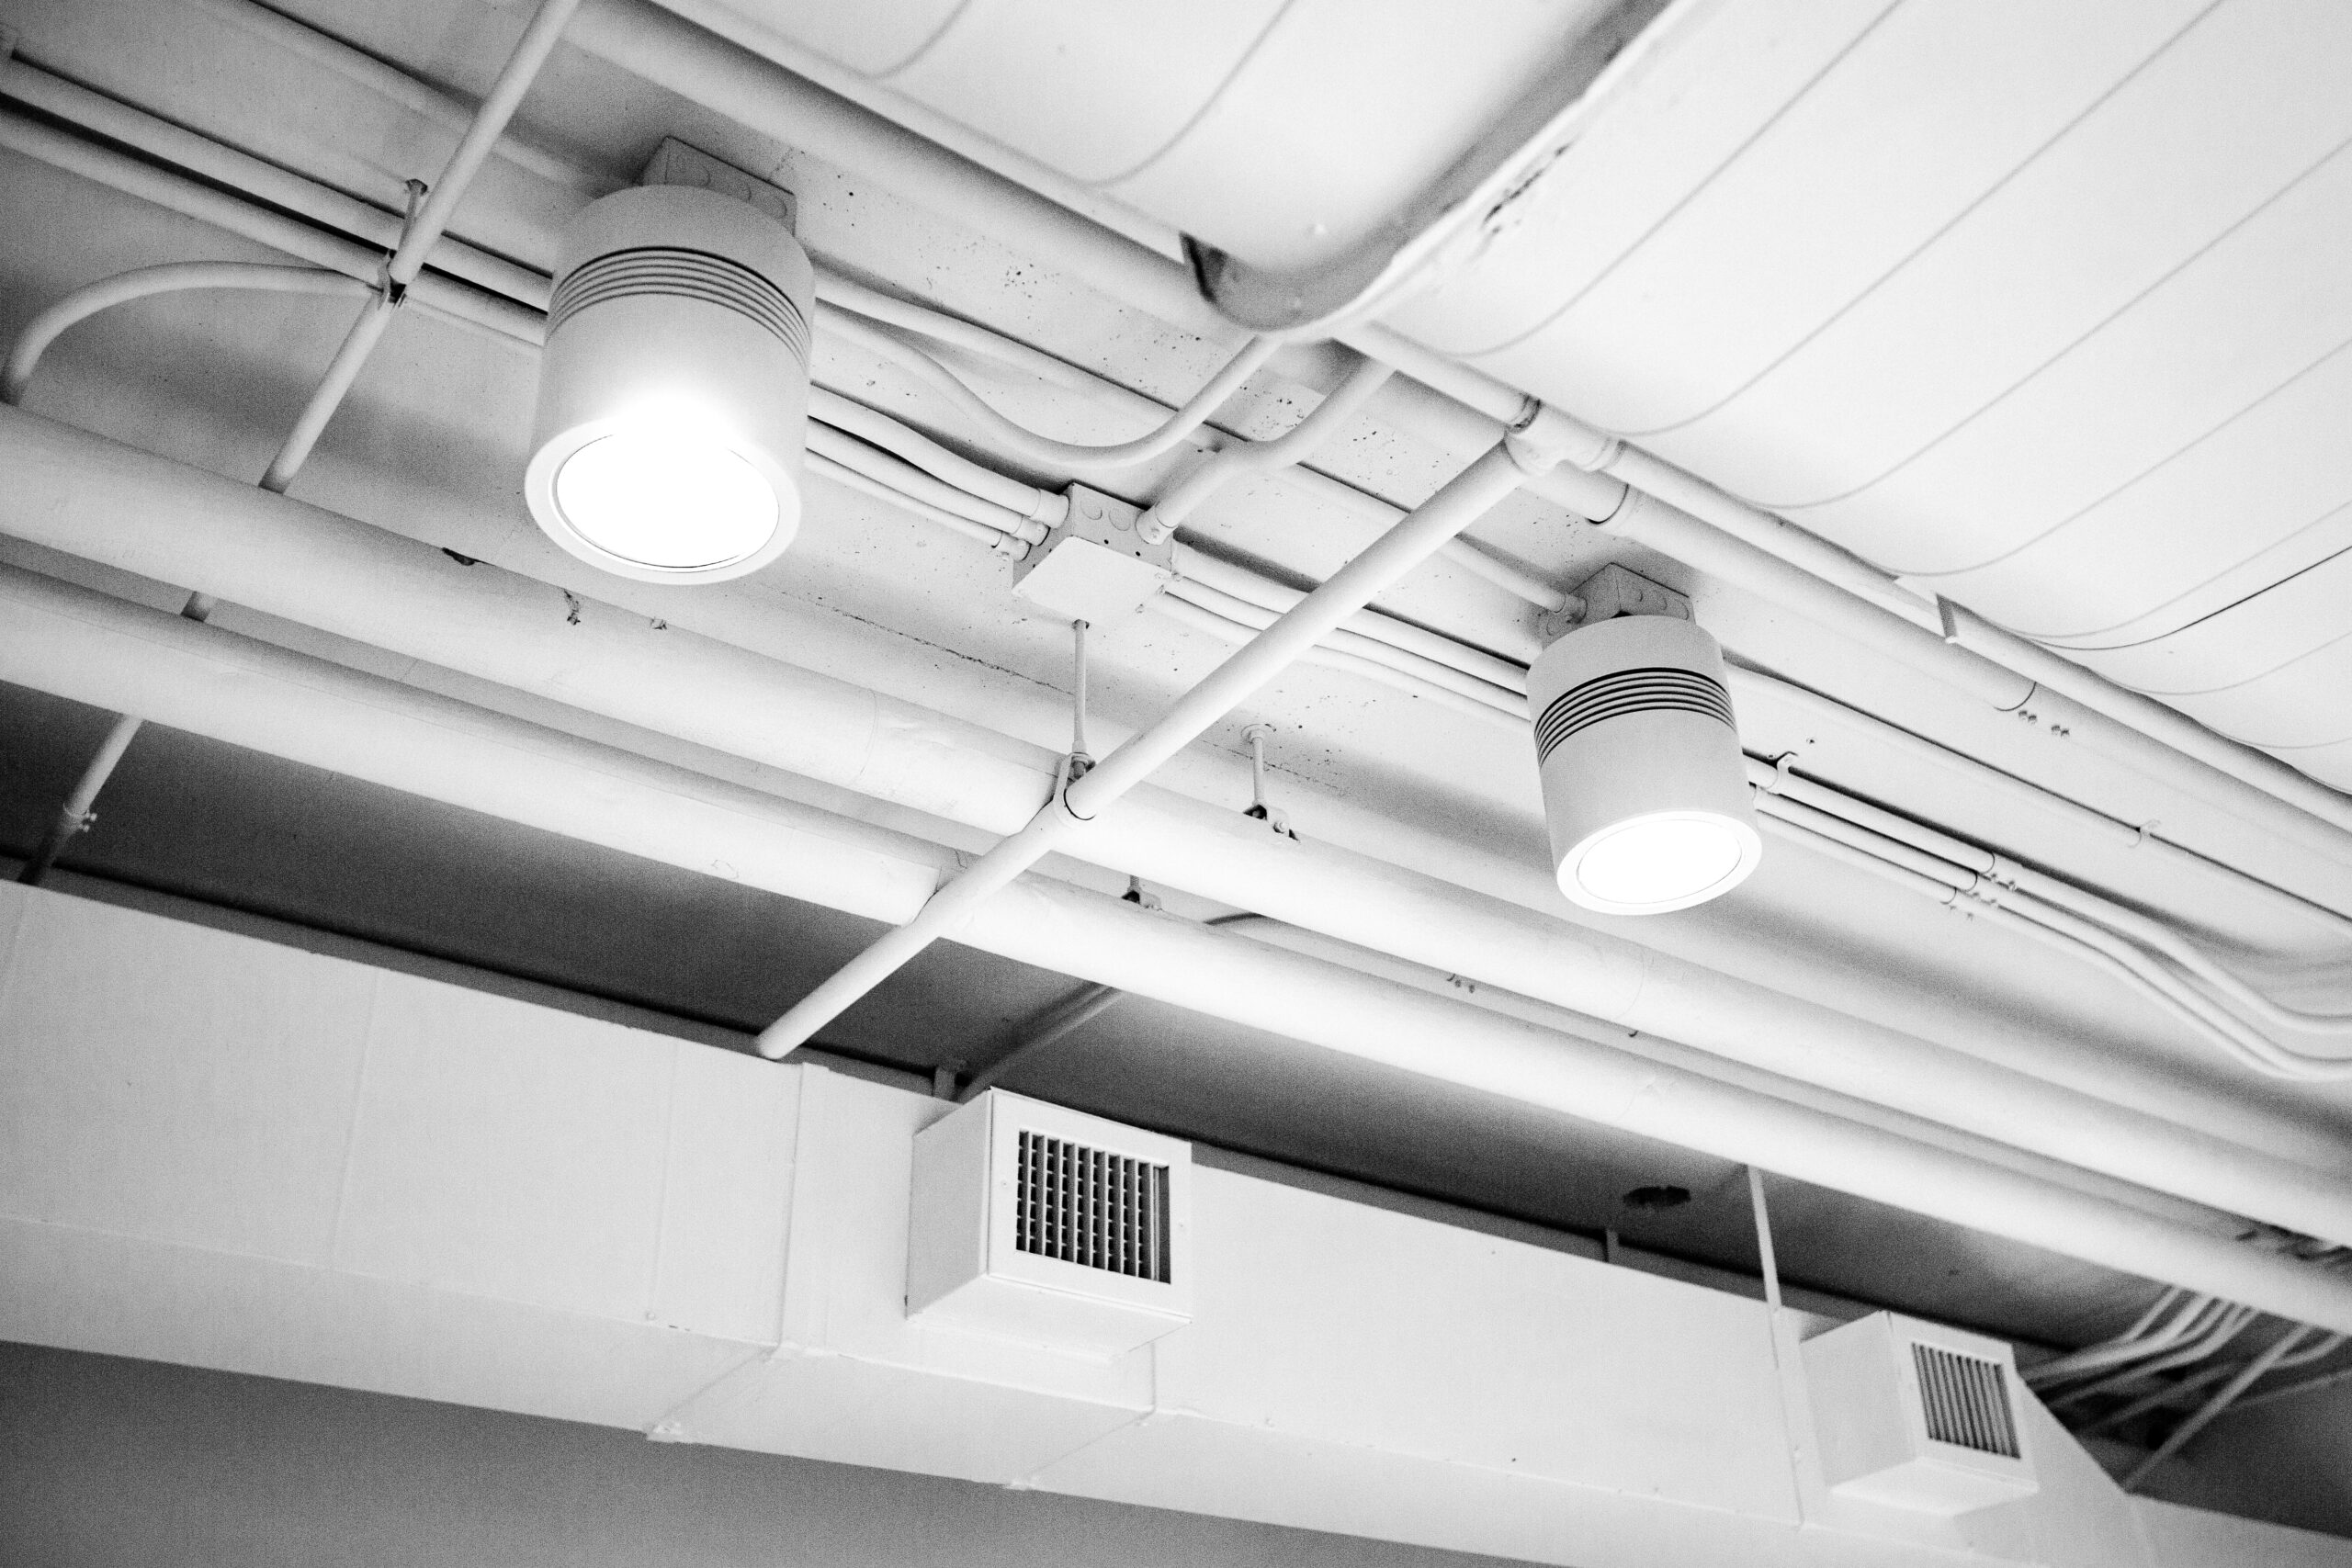 Commercial vents and ductwork